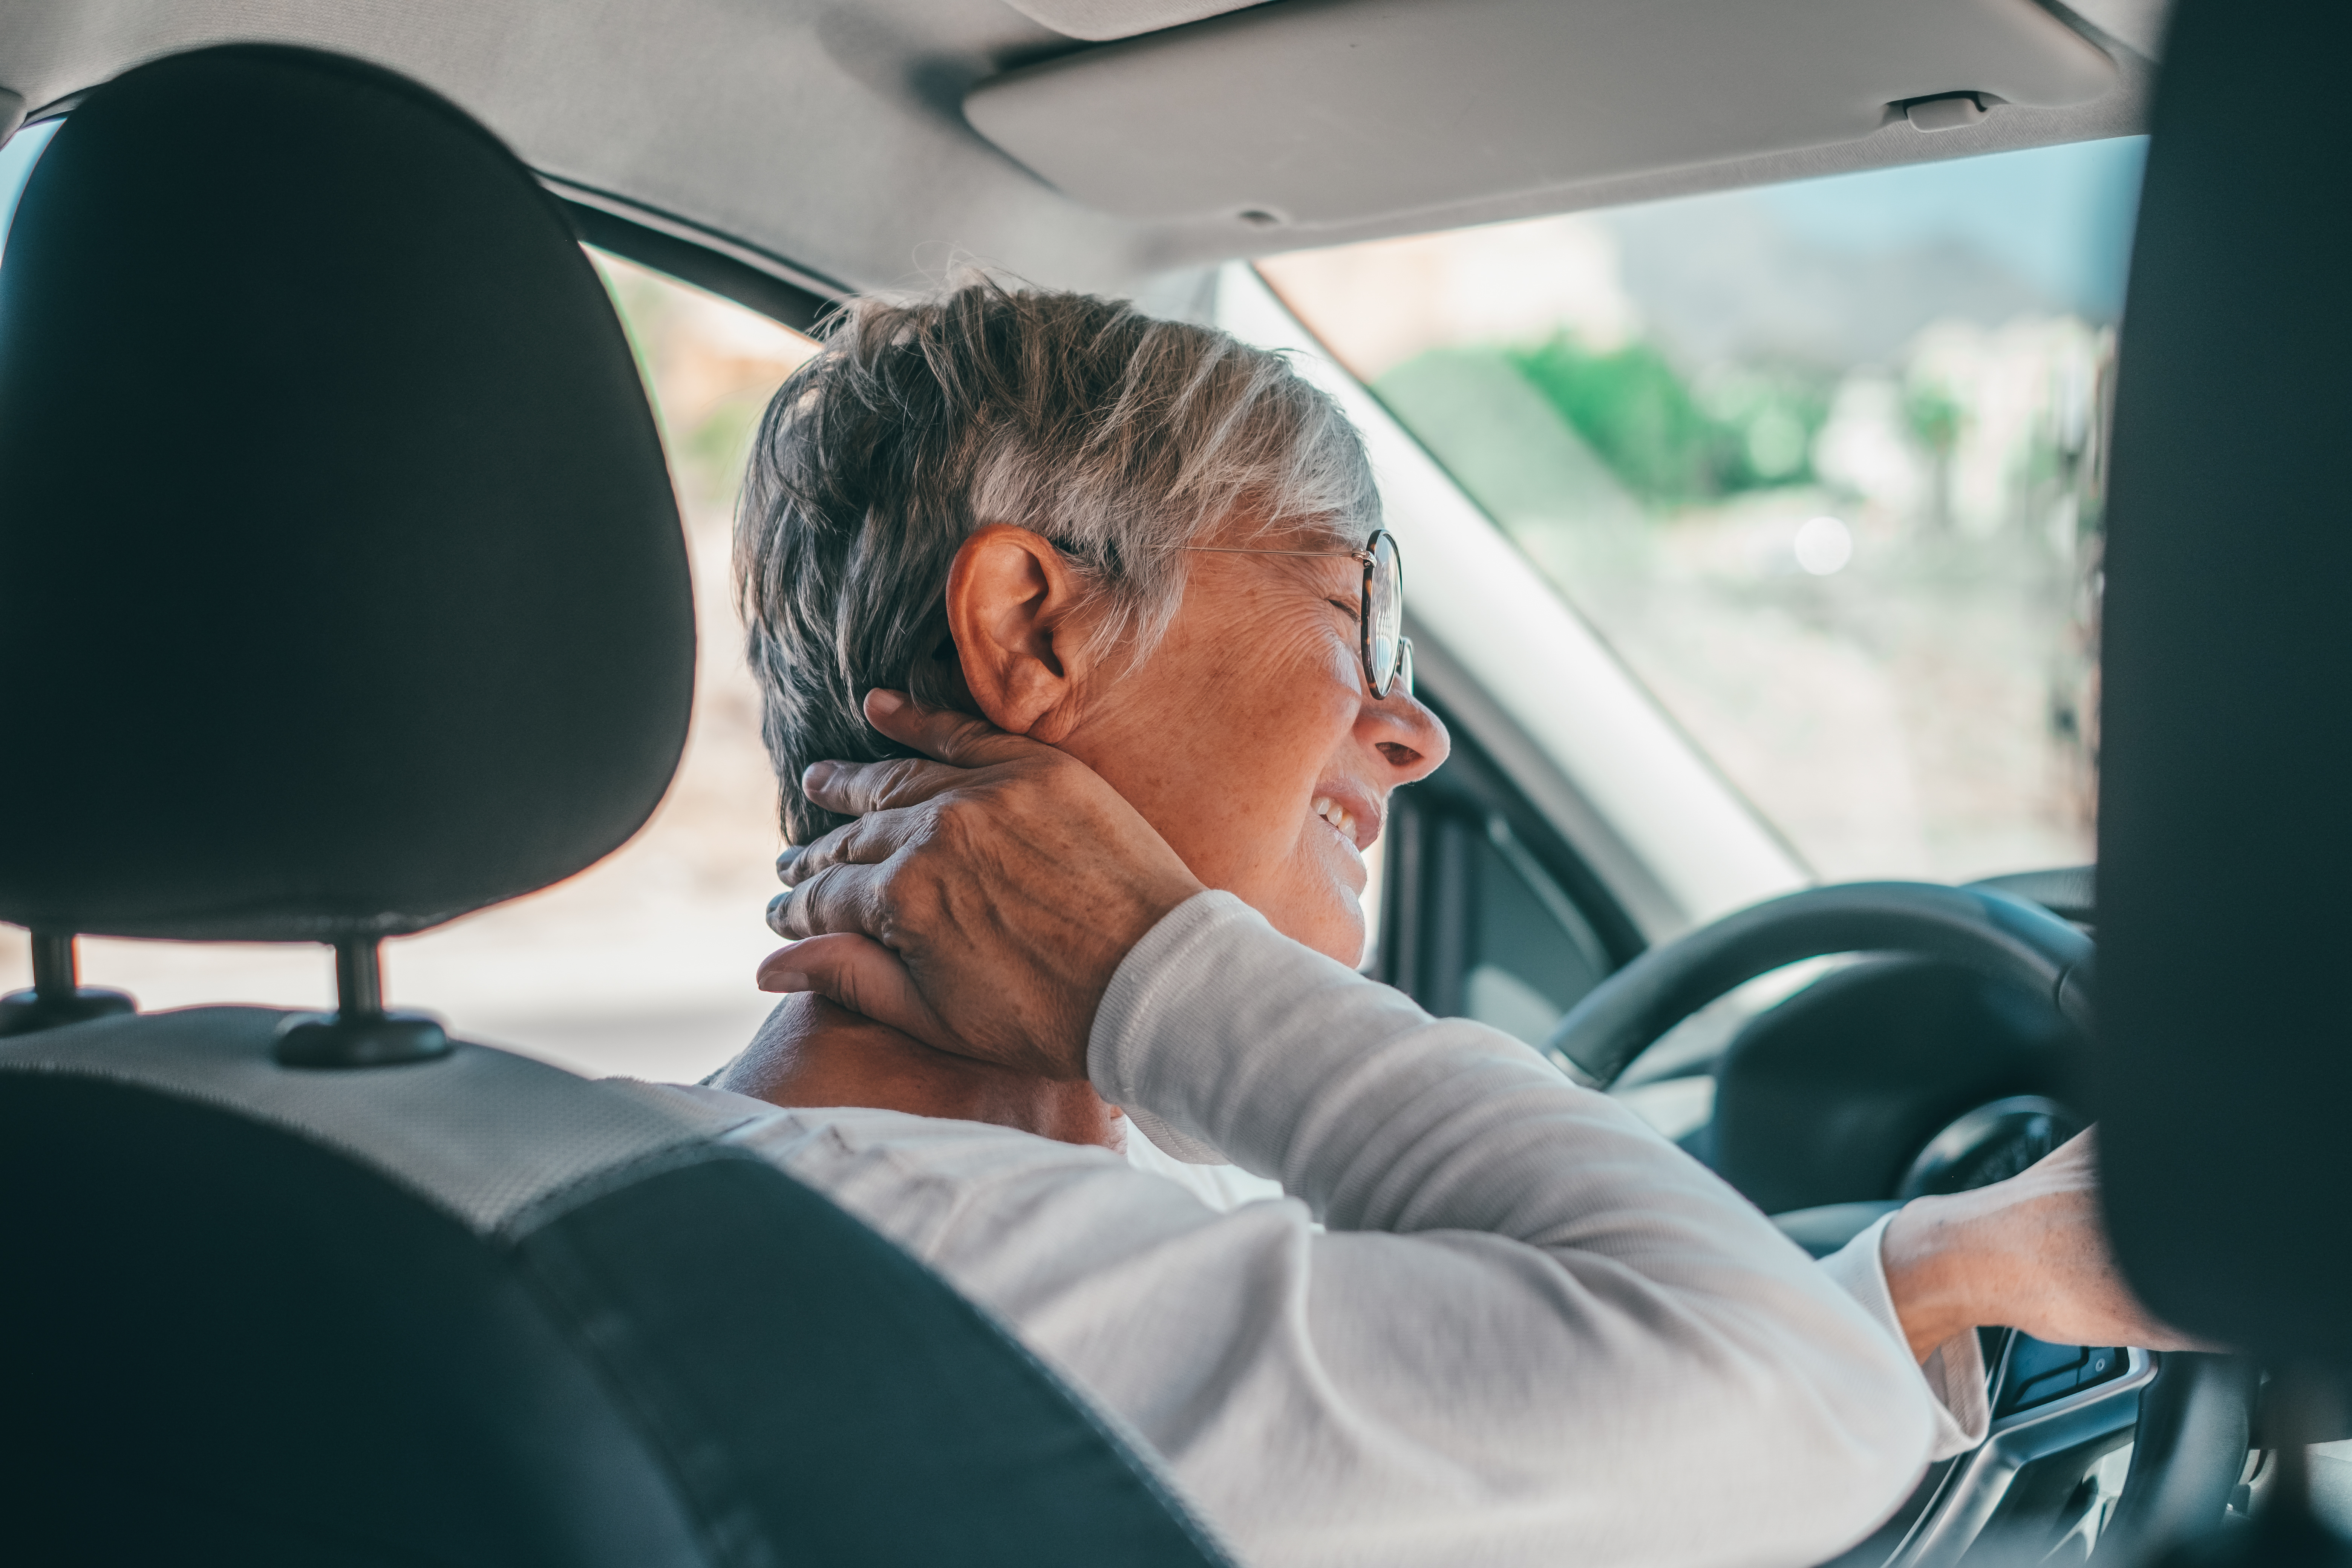 Common Neck Injuries from Car Accidents + What To Do